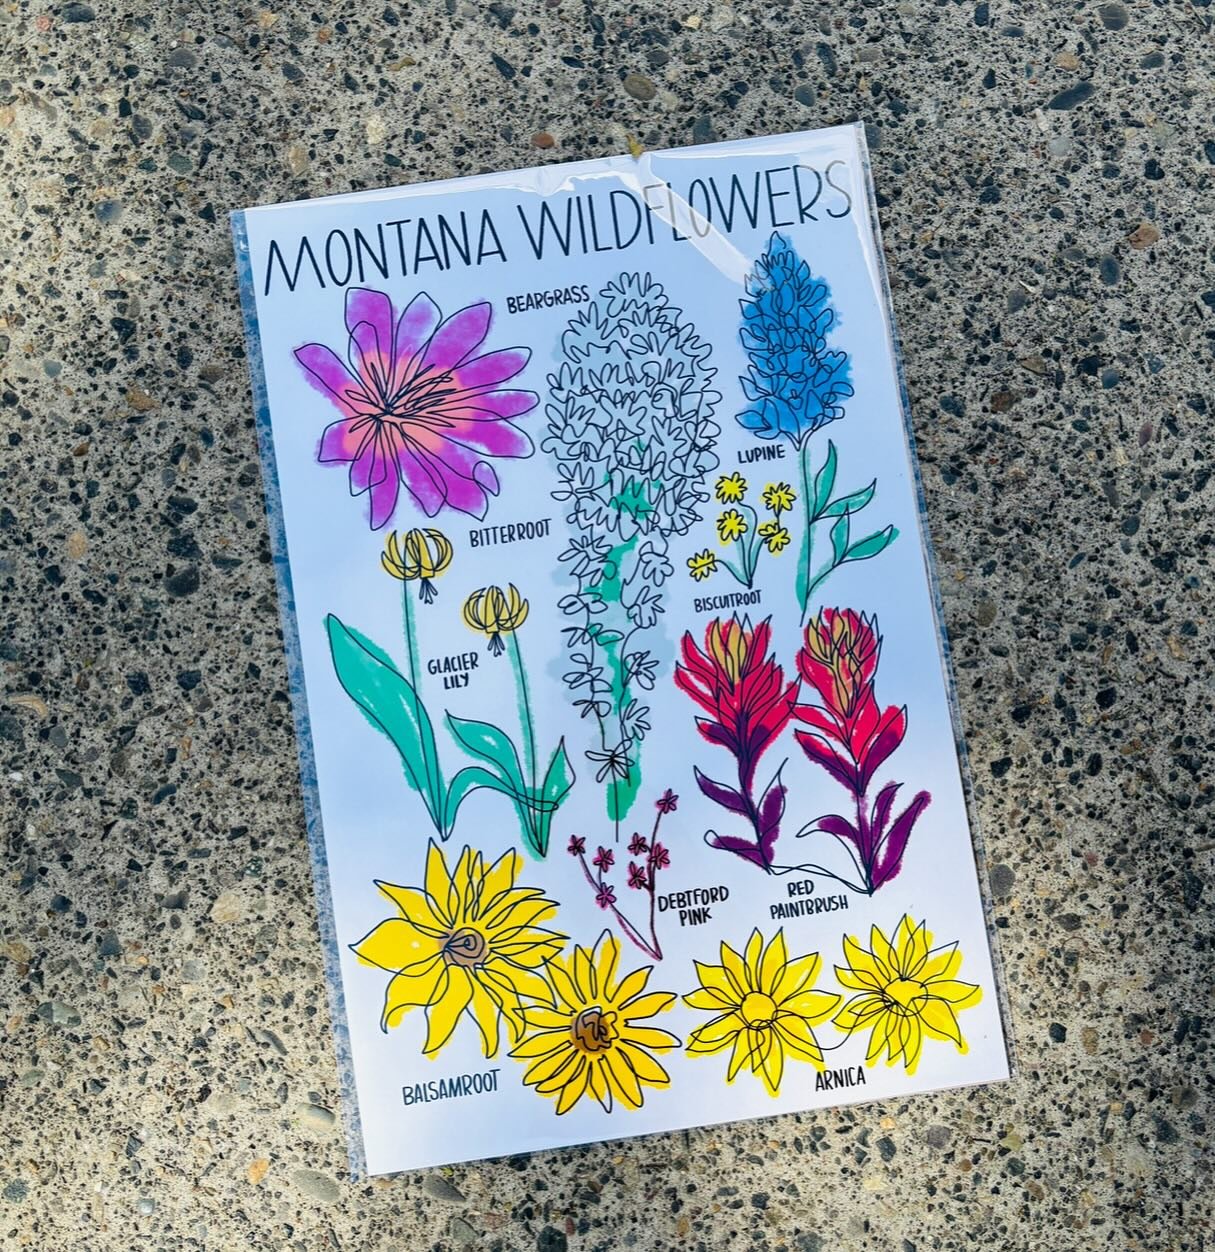 🗣️💐you can buy yourself flowerssssssssss 💐 Montana wildflower print up online and shipping fo free!